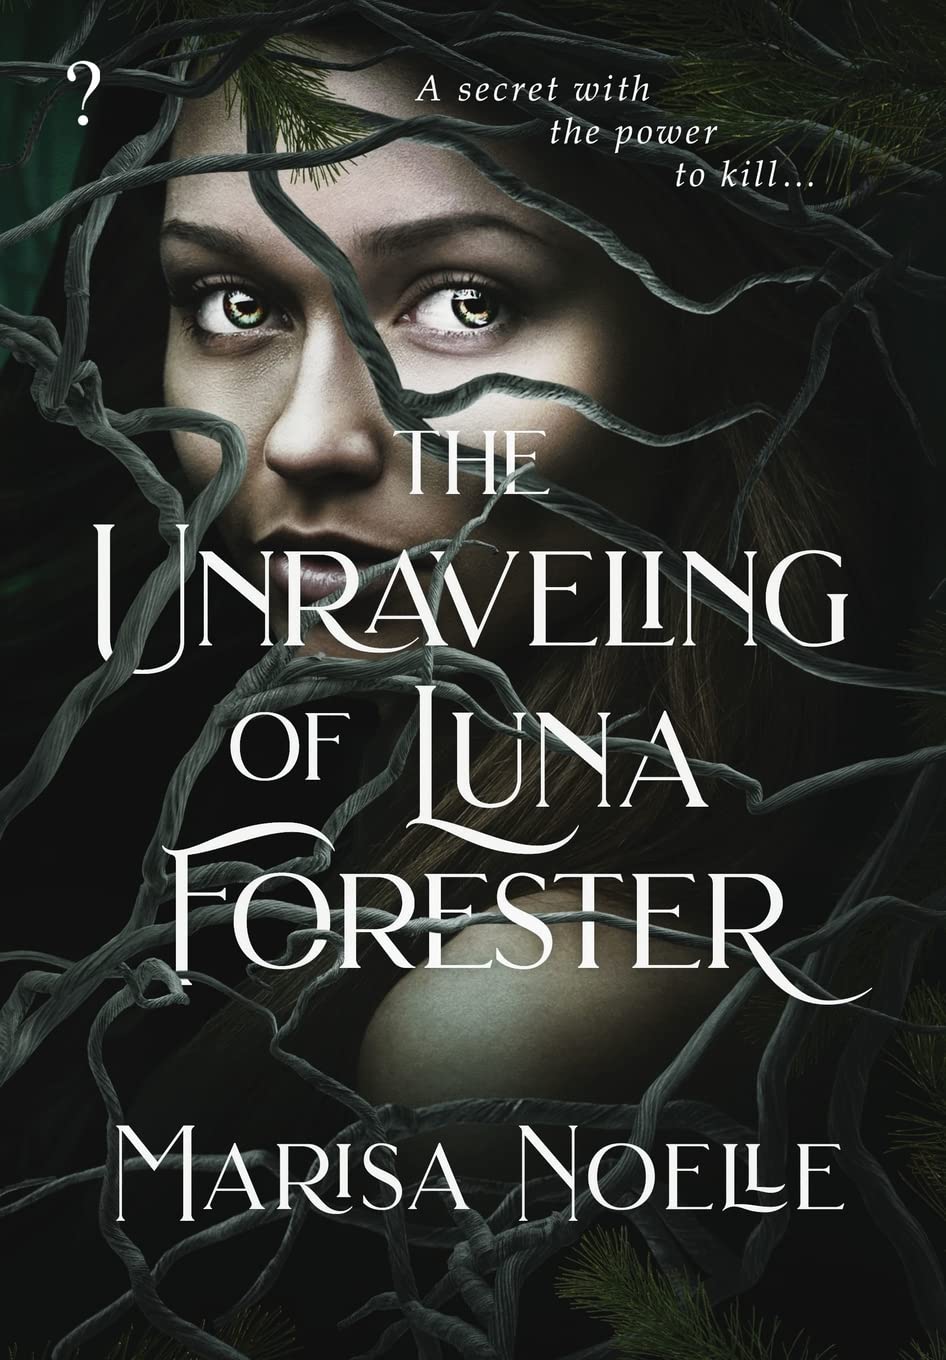 Cover of “The Unraveling of Luna Forester” by Marisa Noelle